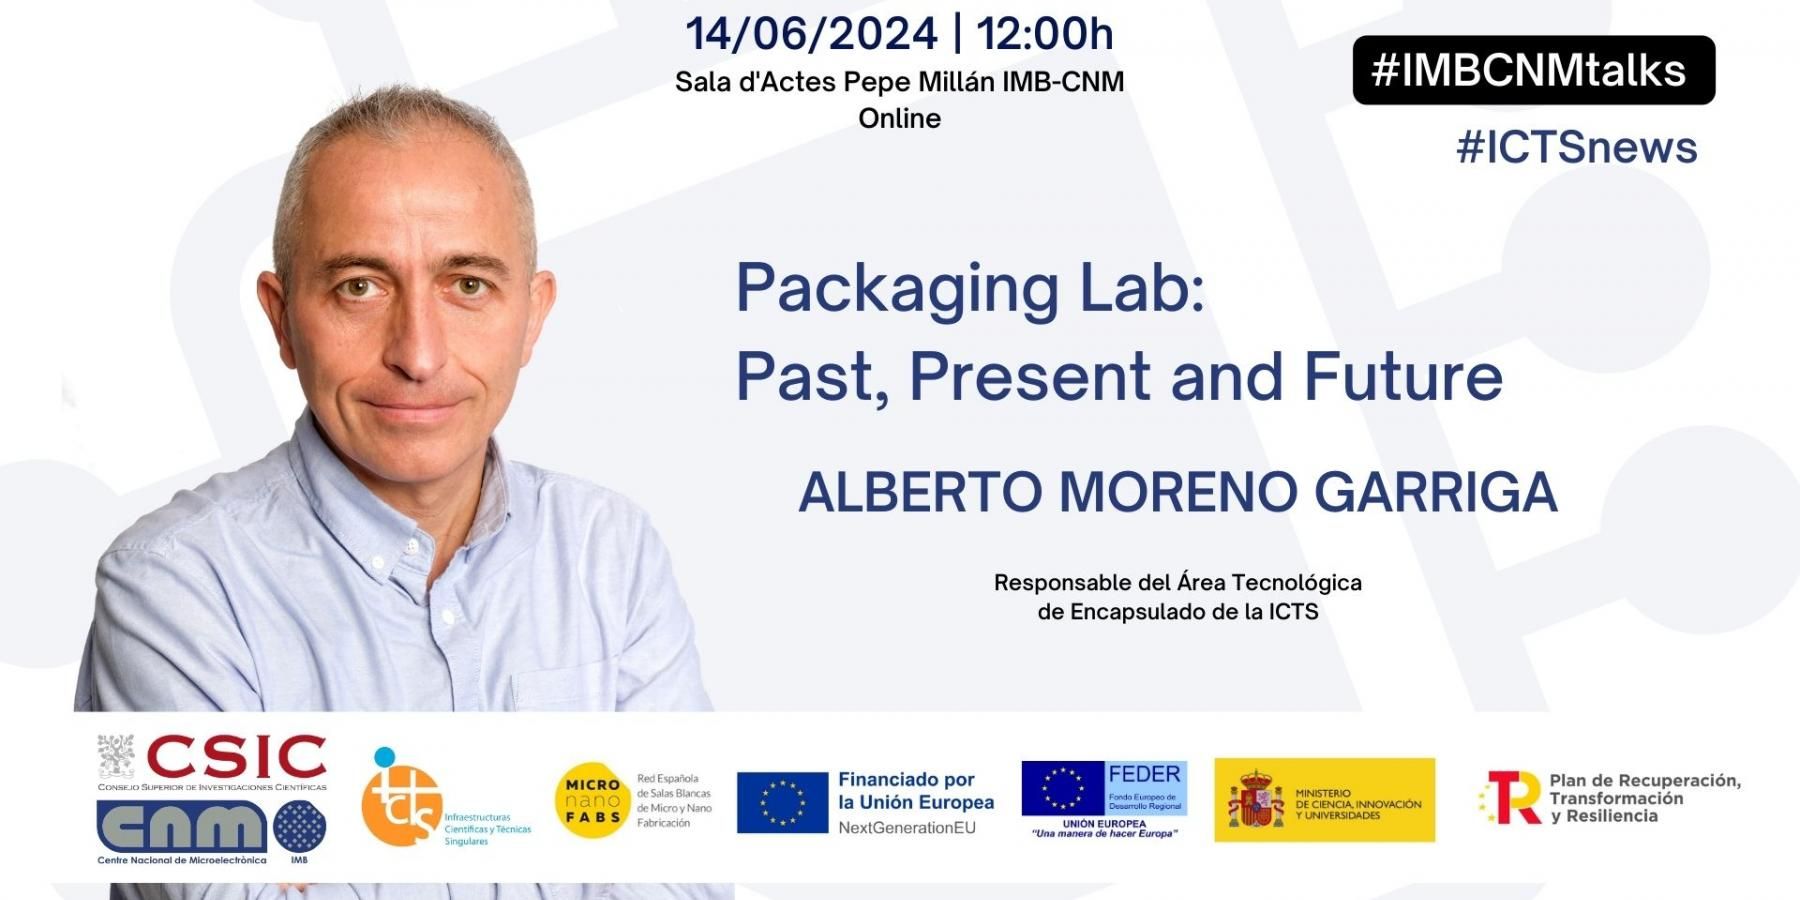 IMB-CNM Talks: Packaging lab: Past, present and future on June 14th